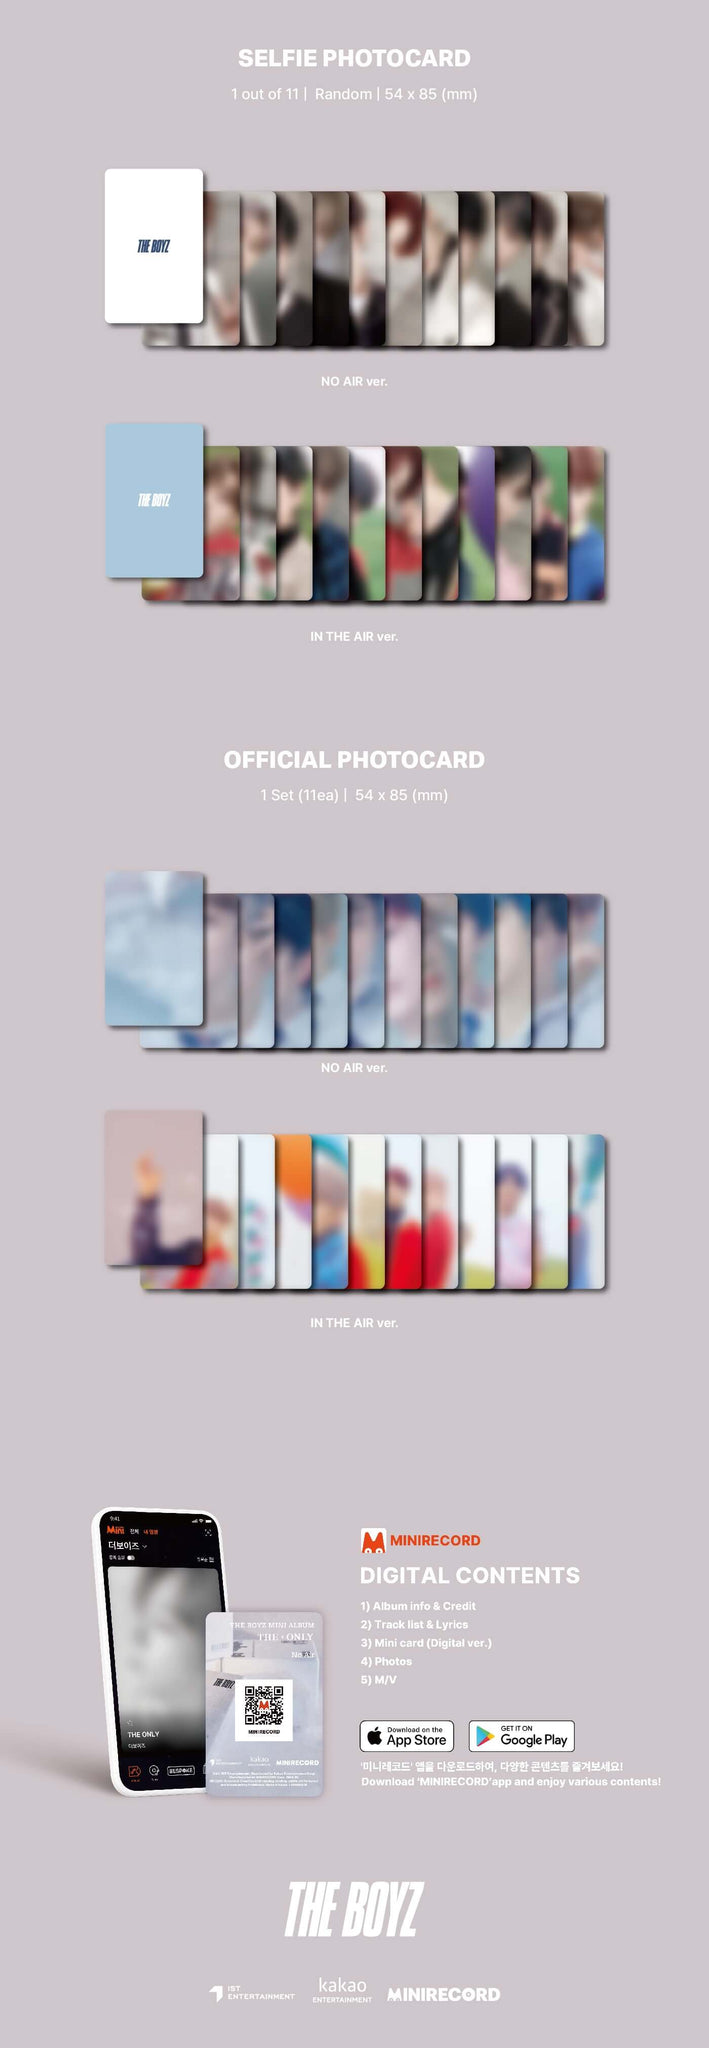 THE BOYZ THE ONLY (Platform Ver.) Inclusions Selfie Photocard Official Photocards Digital Contents